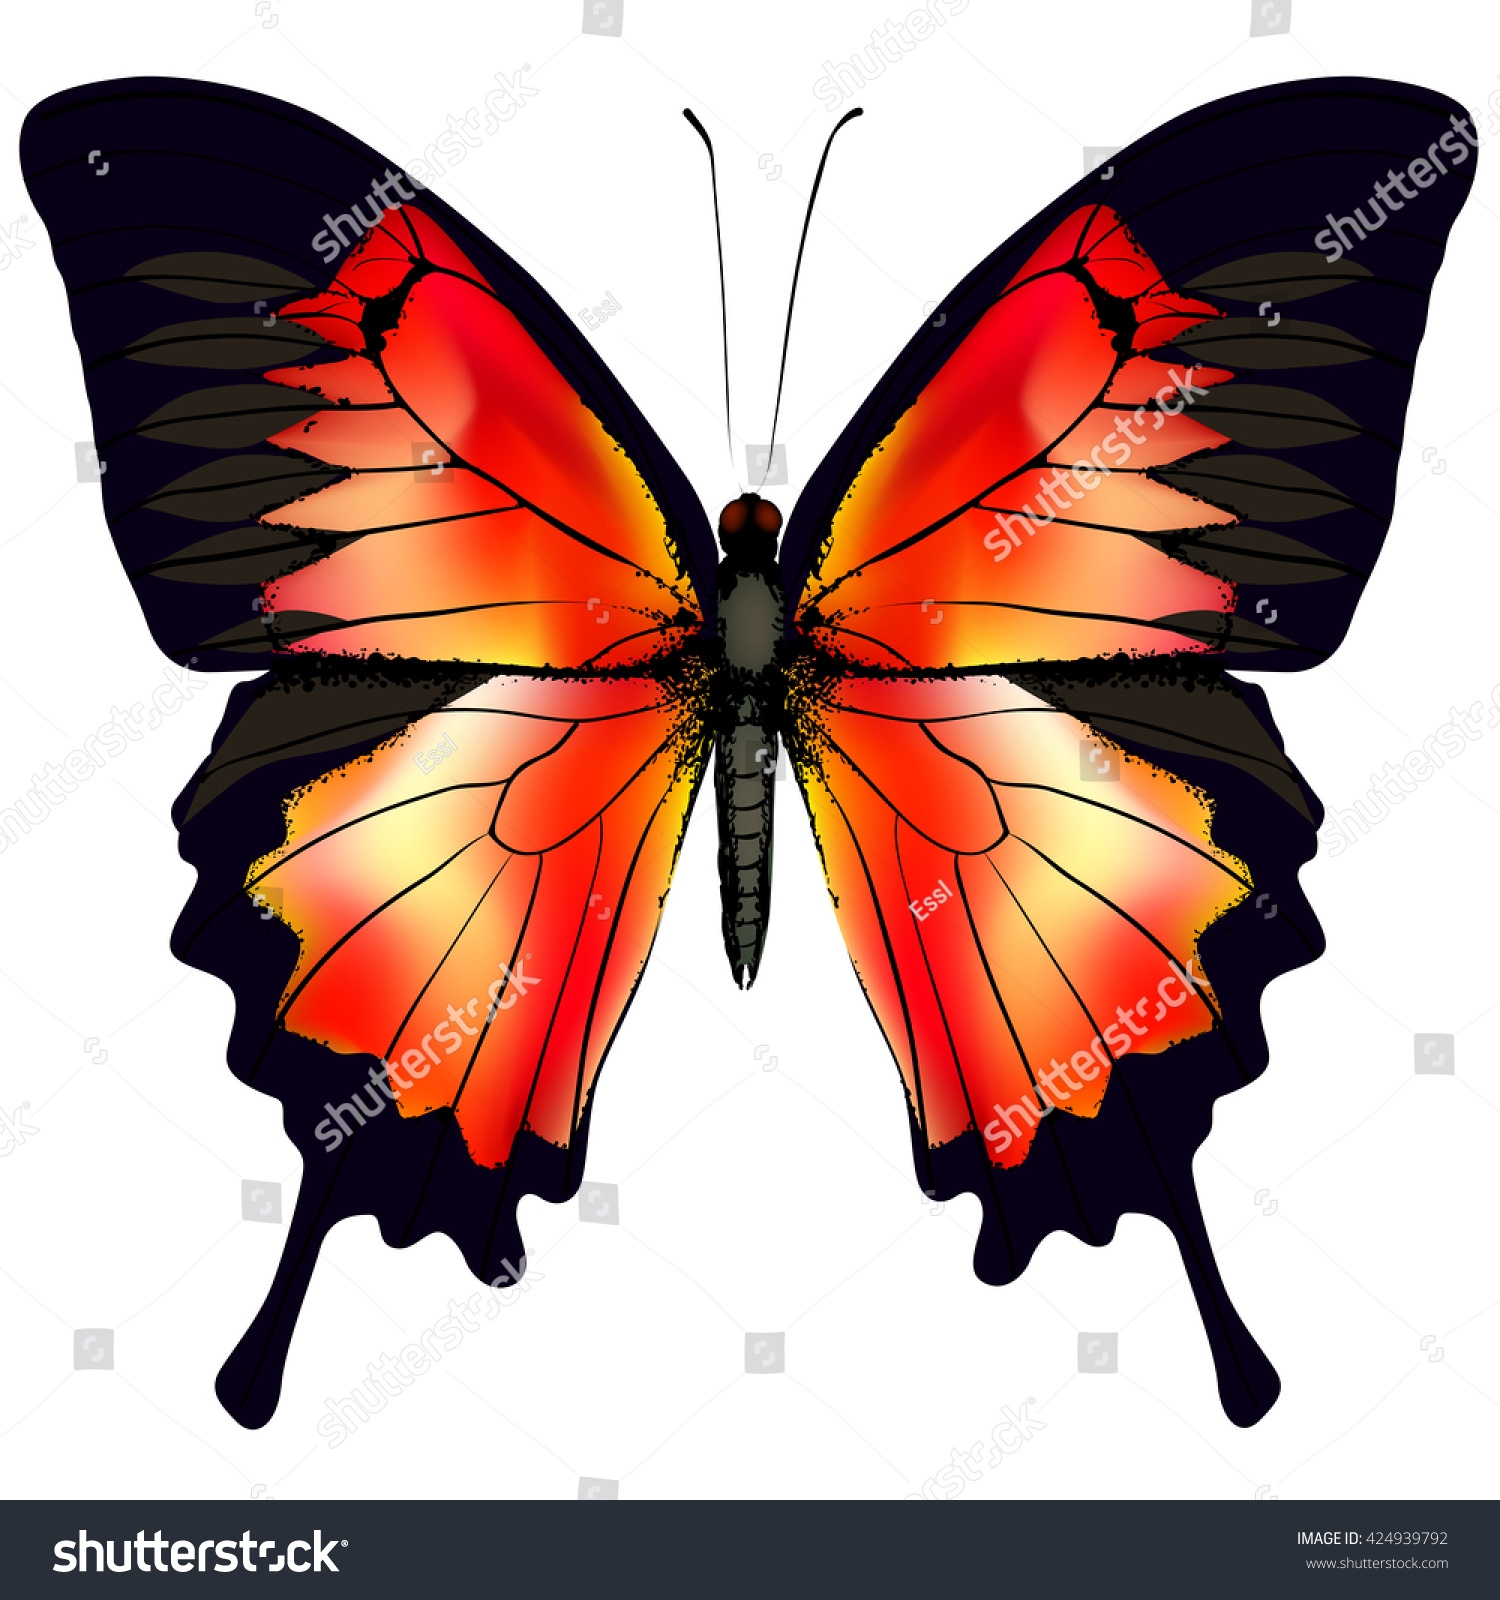 Download Butterfly Vector Illustration Beautiful Red Butterfly ...